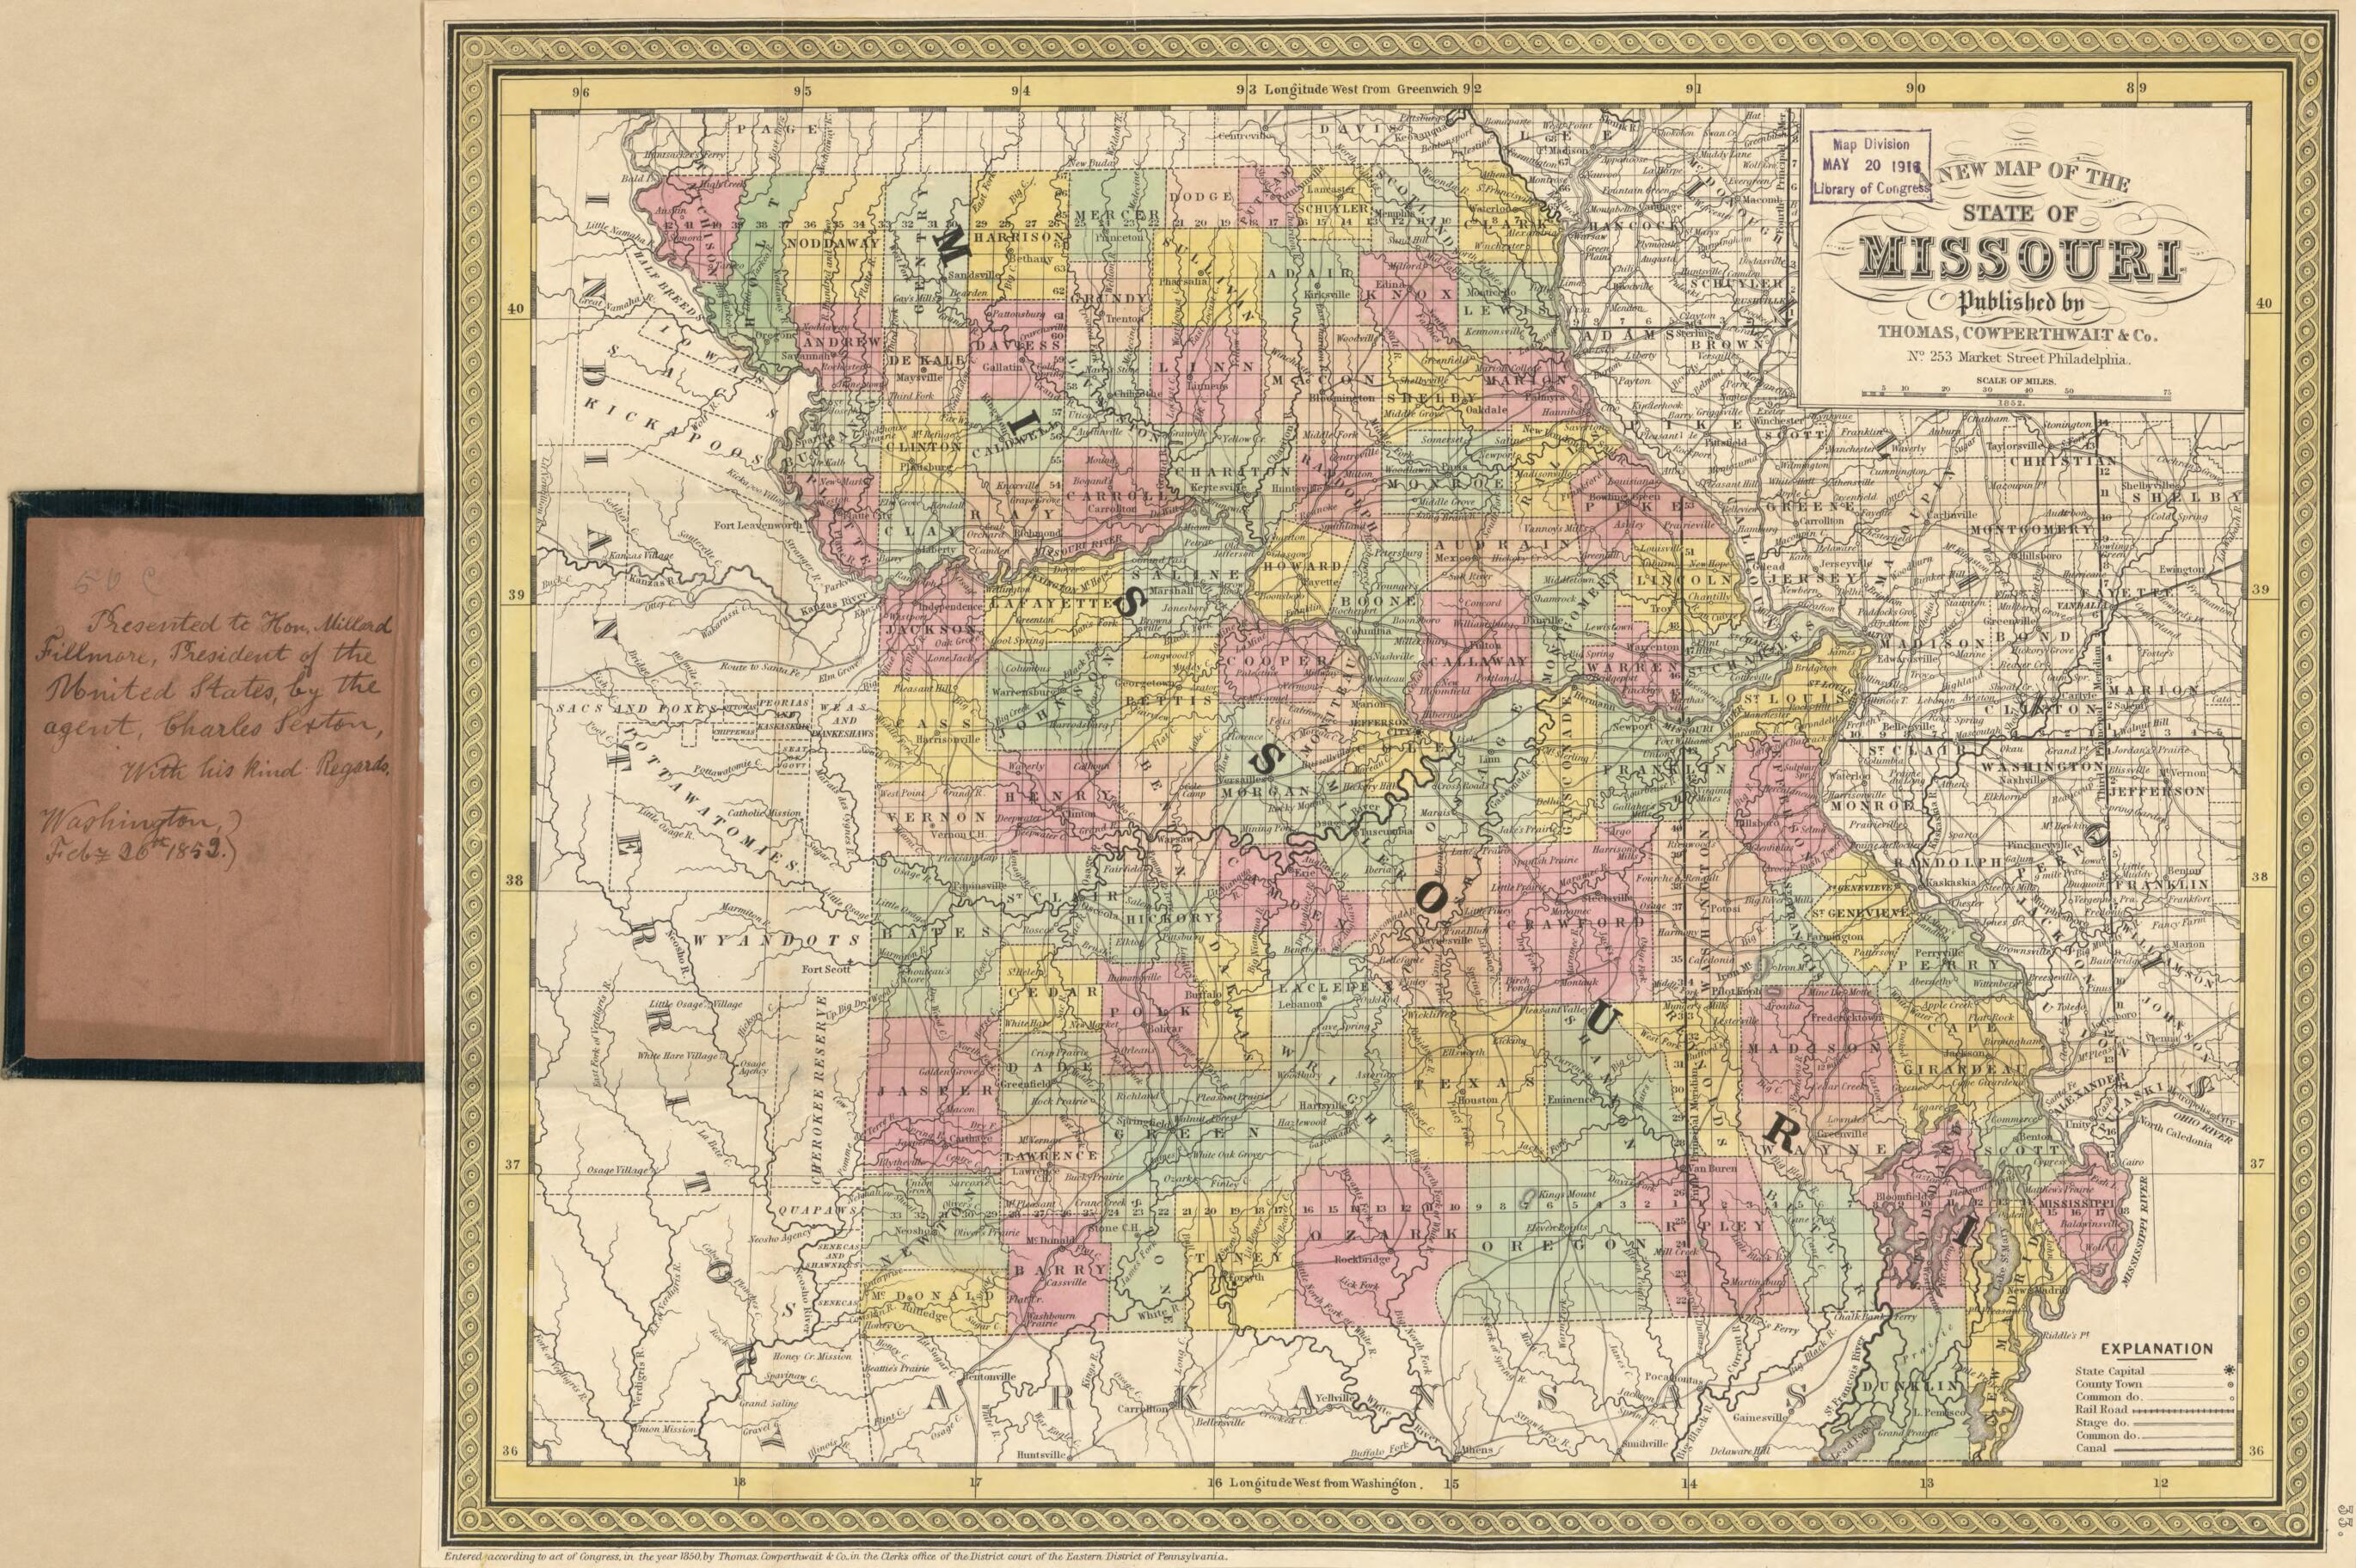 This old map of New Map of the State of Missouri. (Missouri) from 1852 was created by Millard Fillmore, Cowperthwait &amp; Co Thomas in 1852